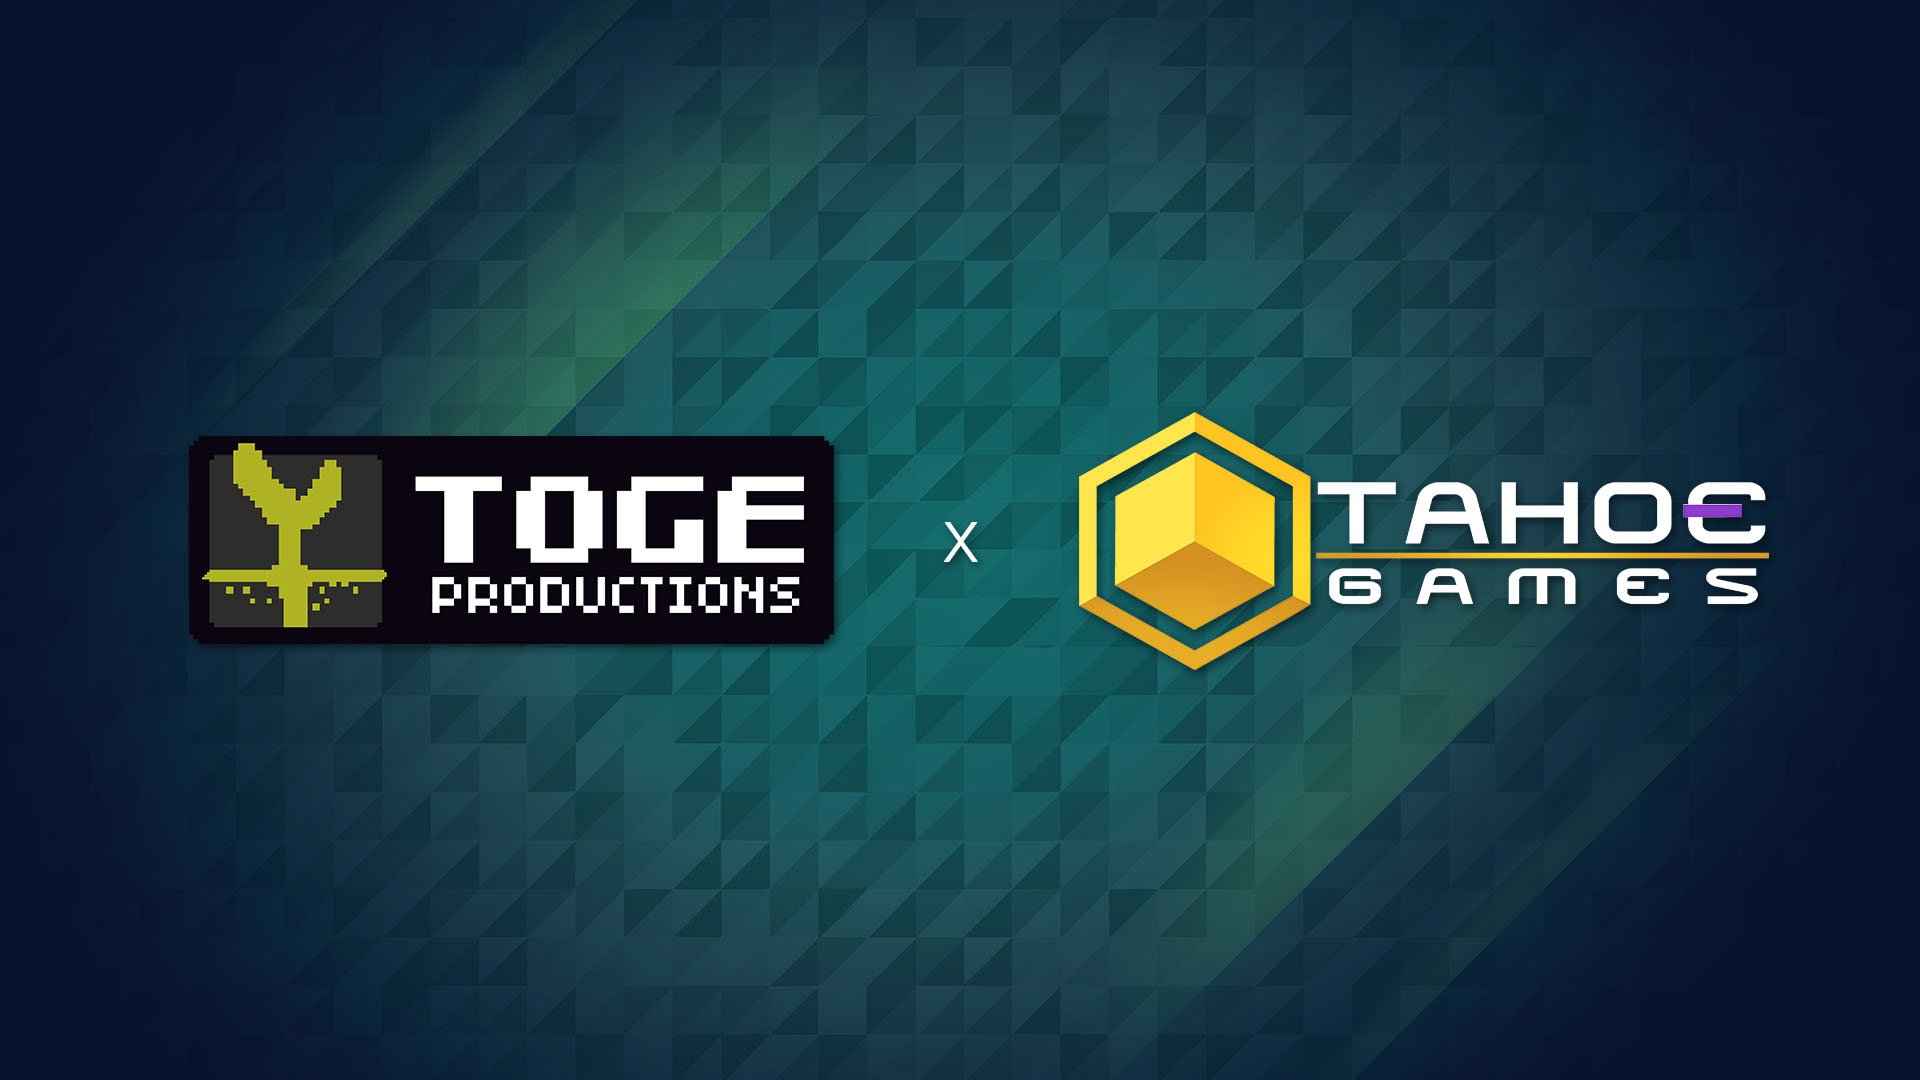 #
      Toge Productions acquires Tahoe Games